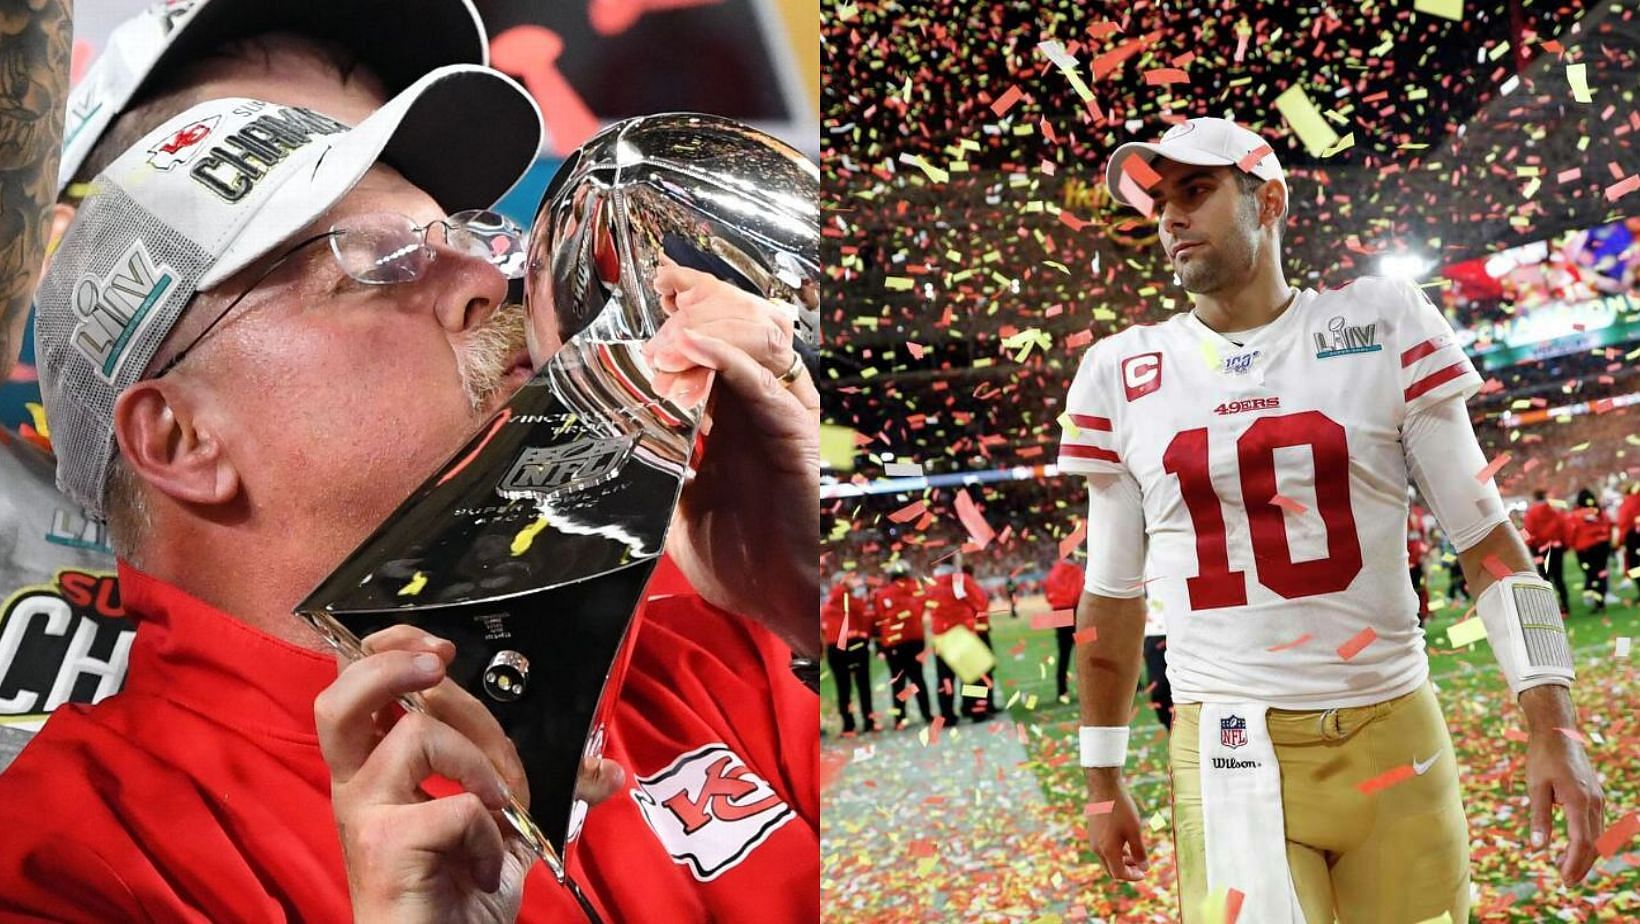 Andy Reid beat Garoppolo and 49ers in the Super Bowl